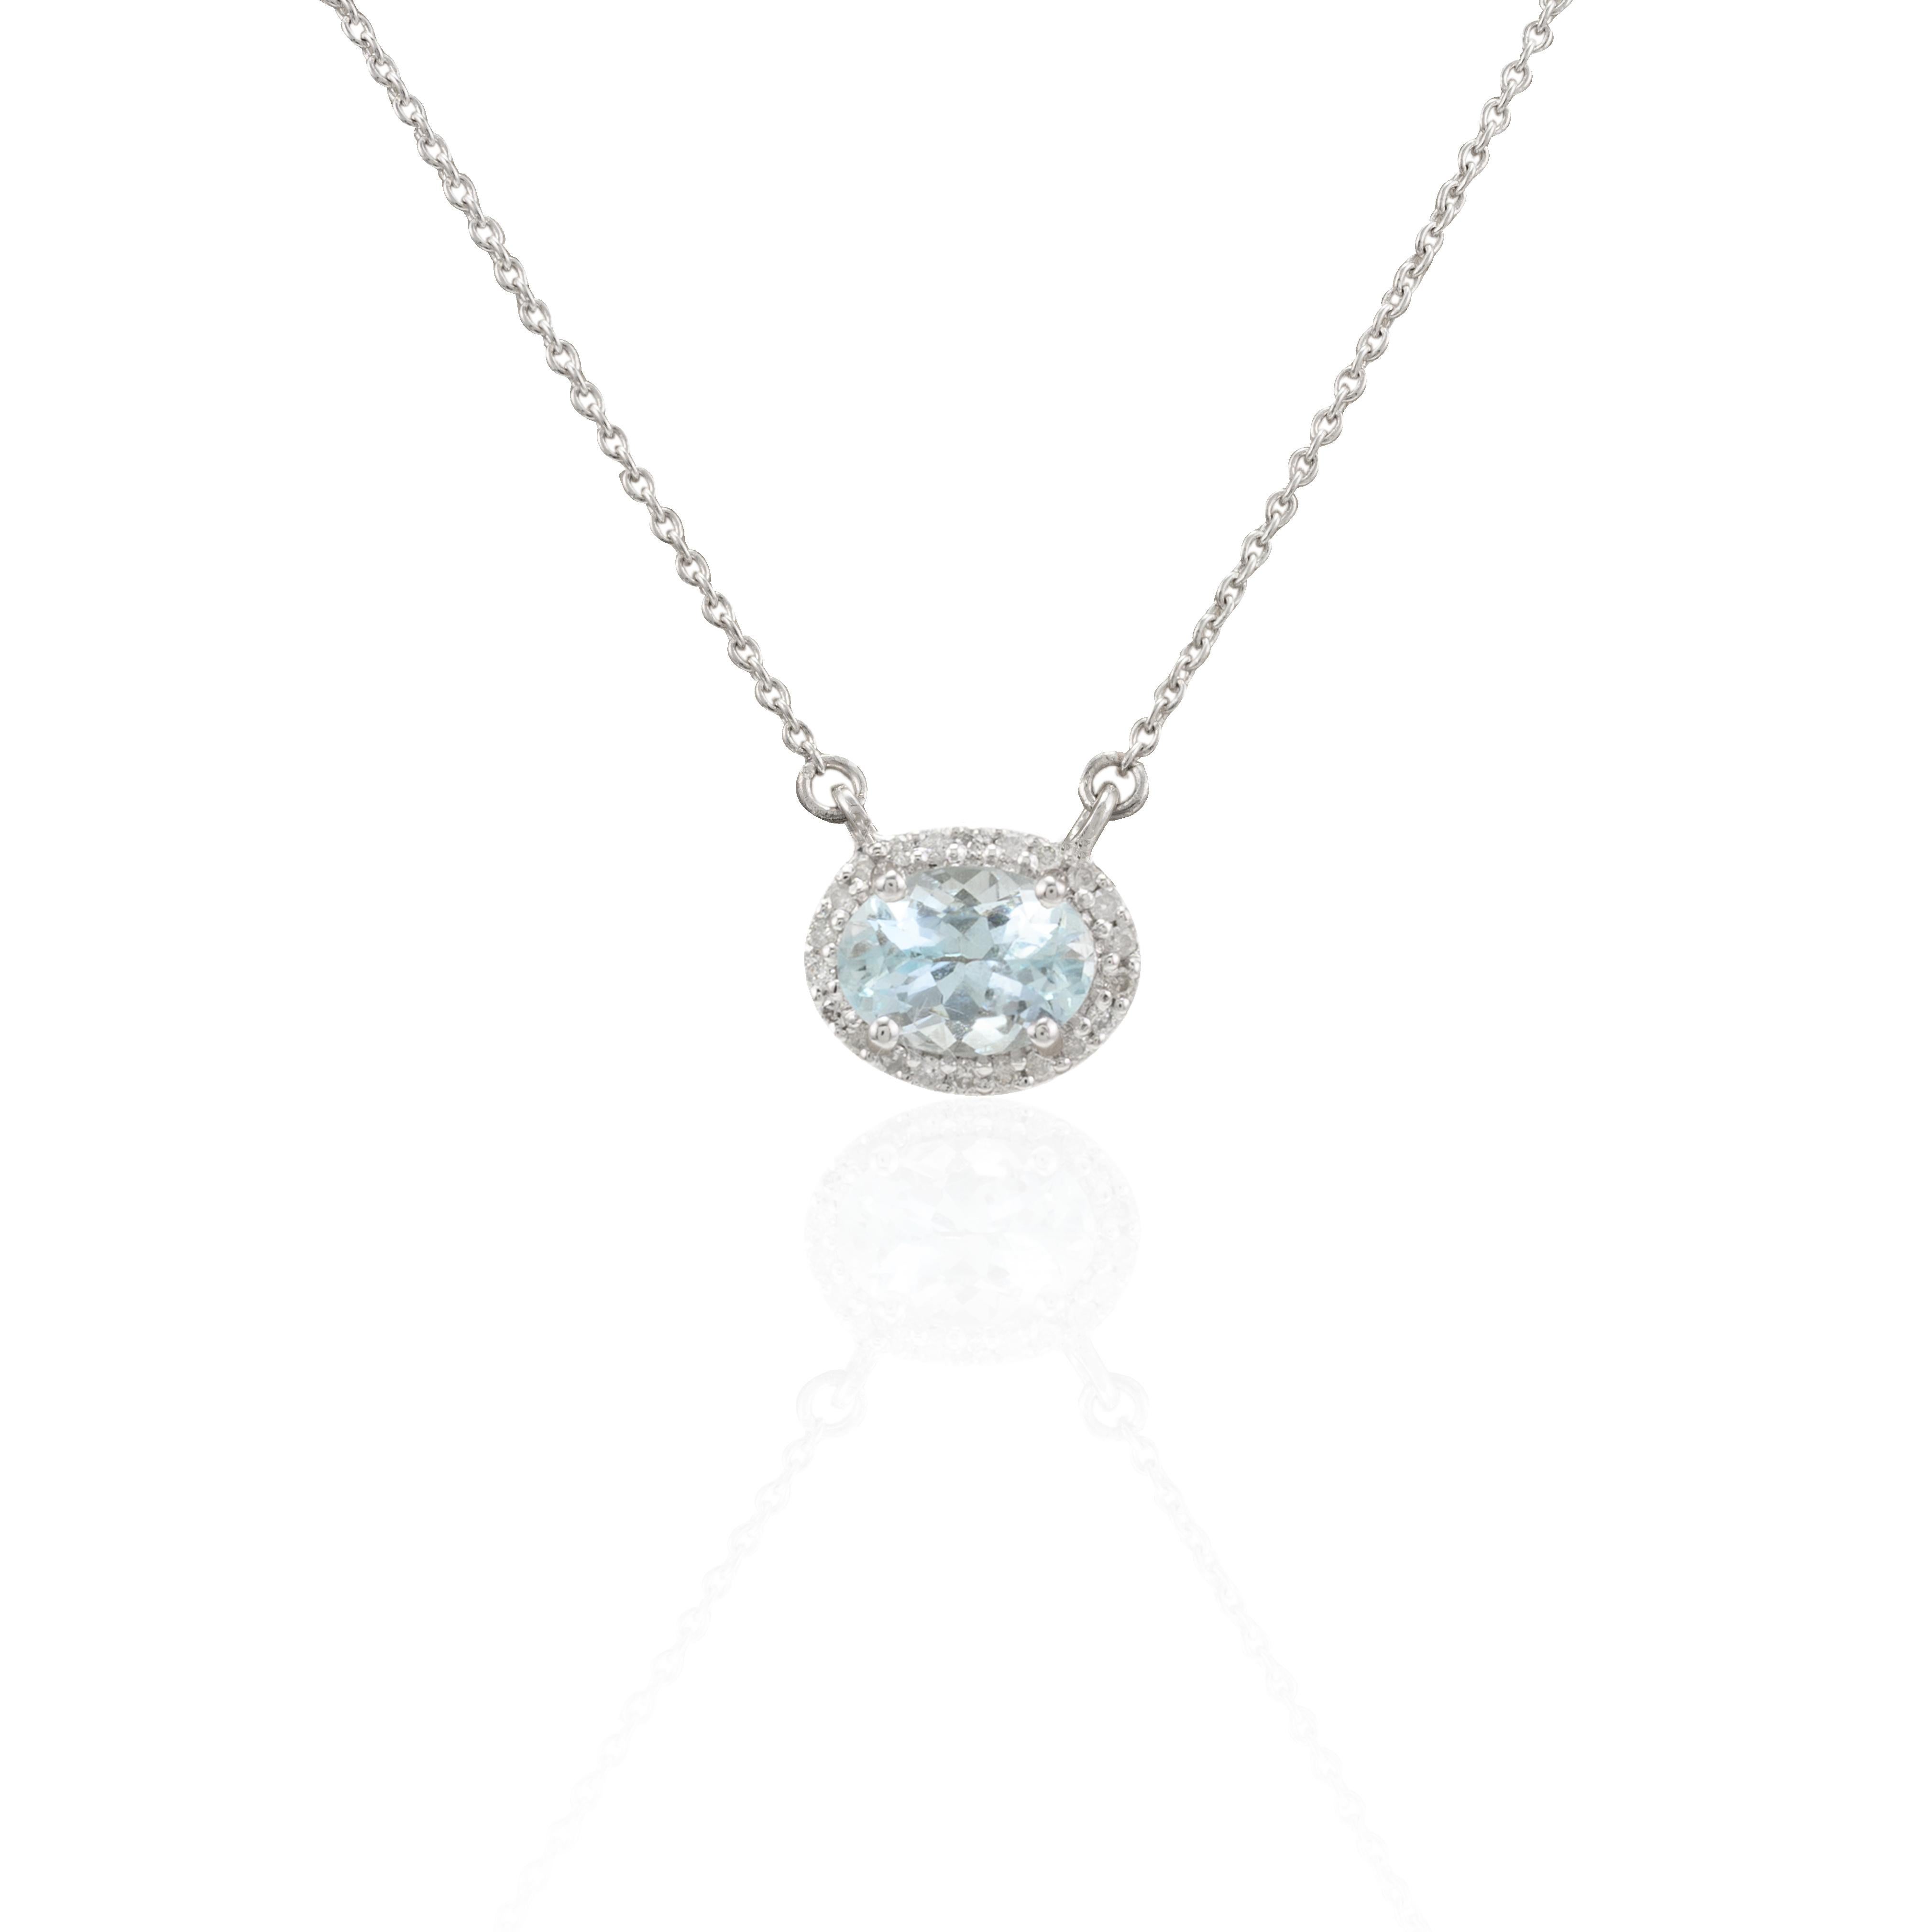 Halo Diamond Aquamarine Necklace 14k Solid White Gold, Thank You Gift For Her For Sale 2